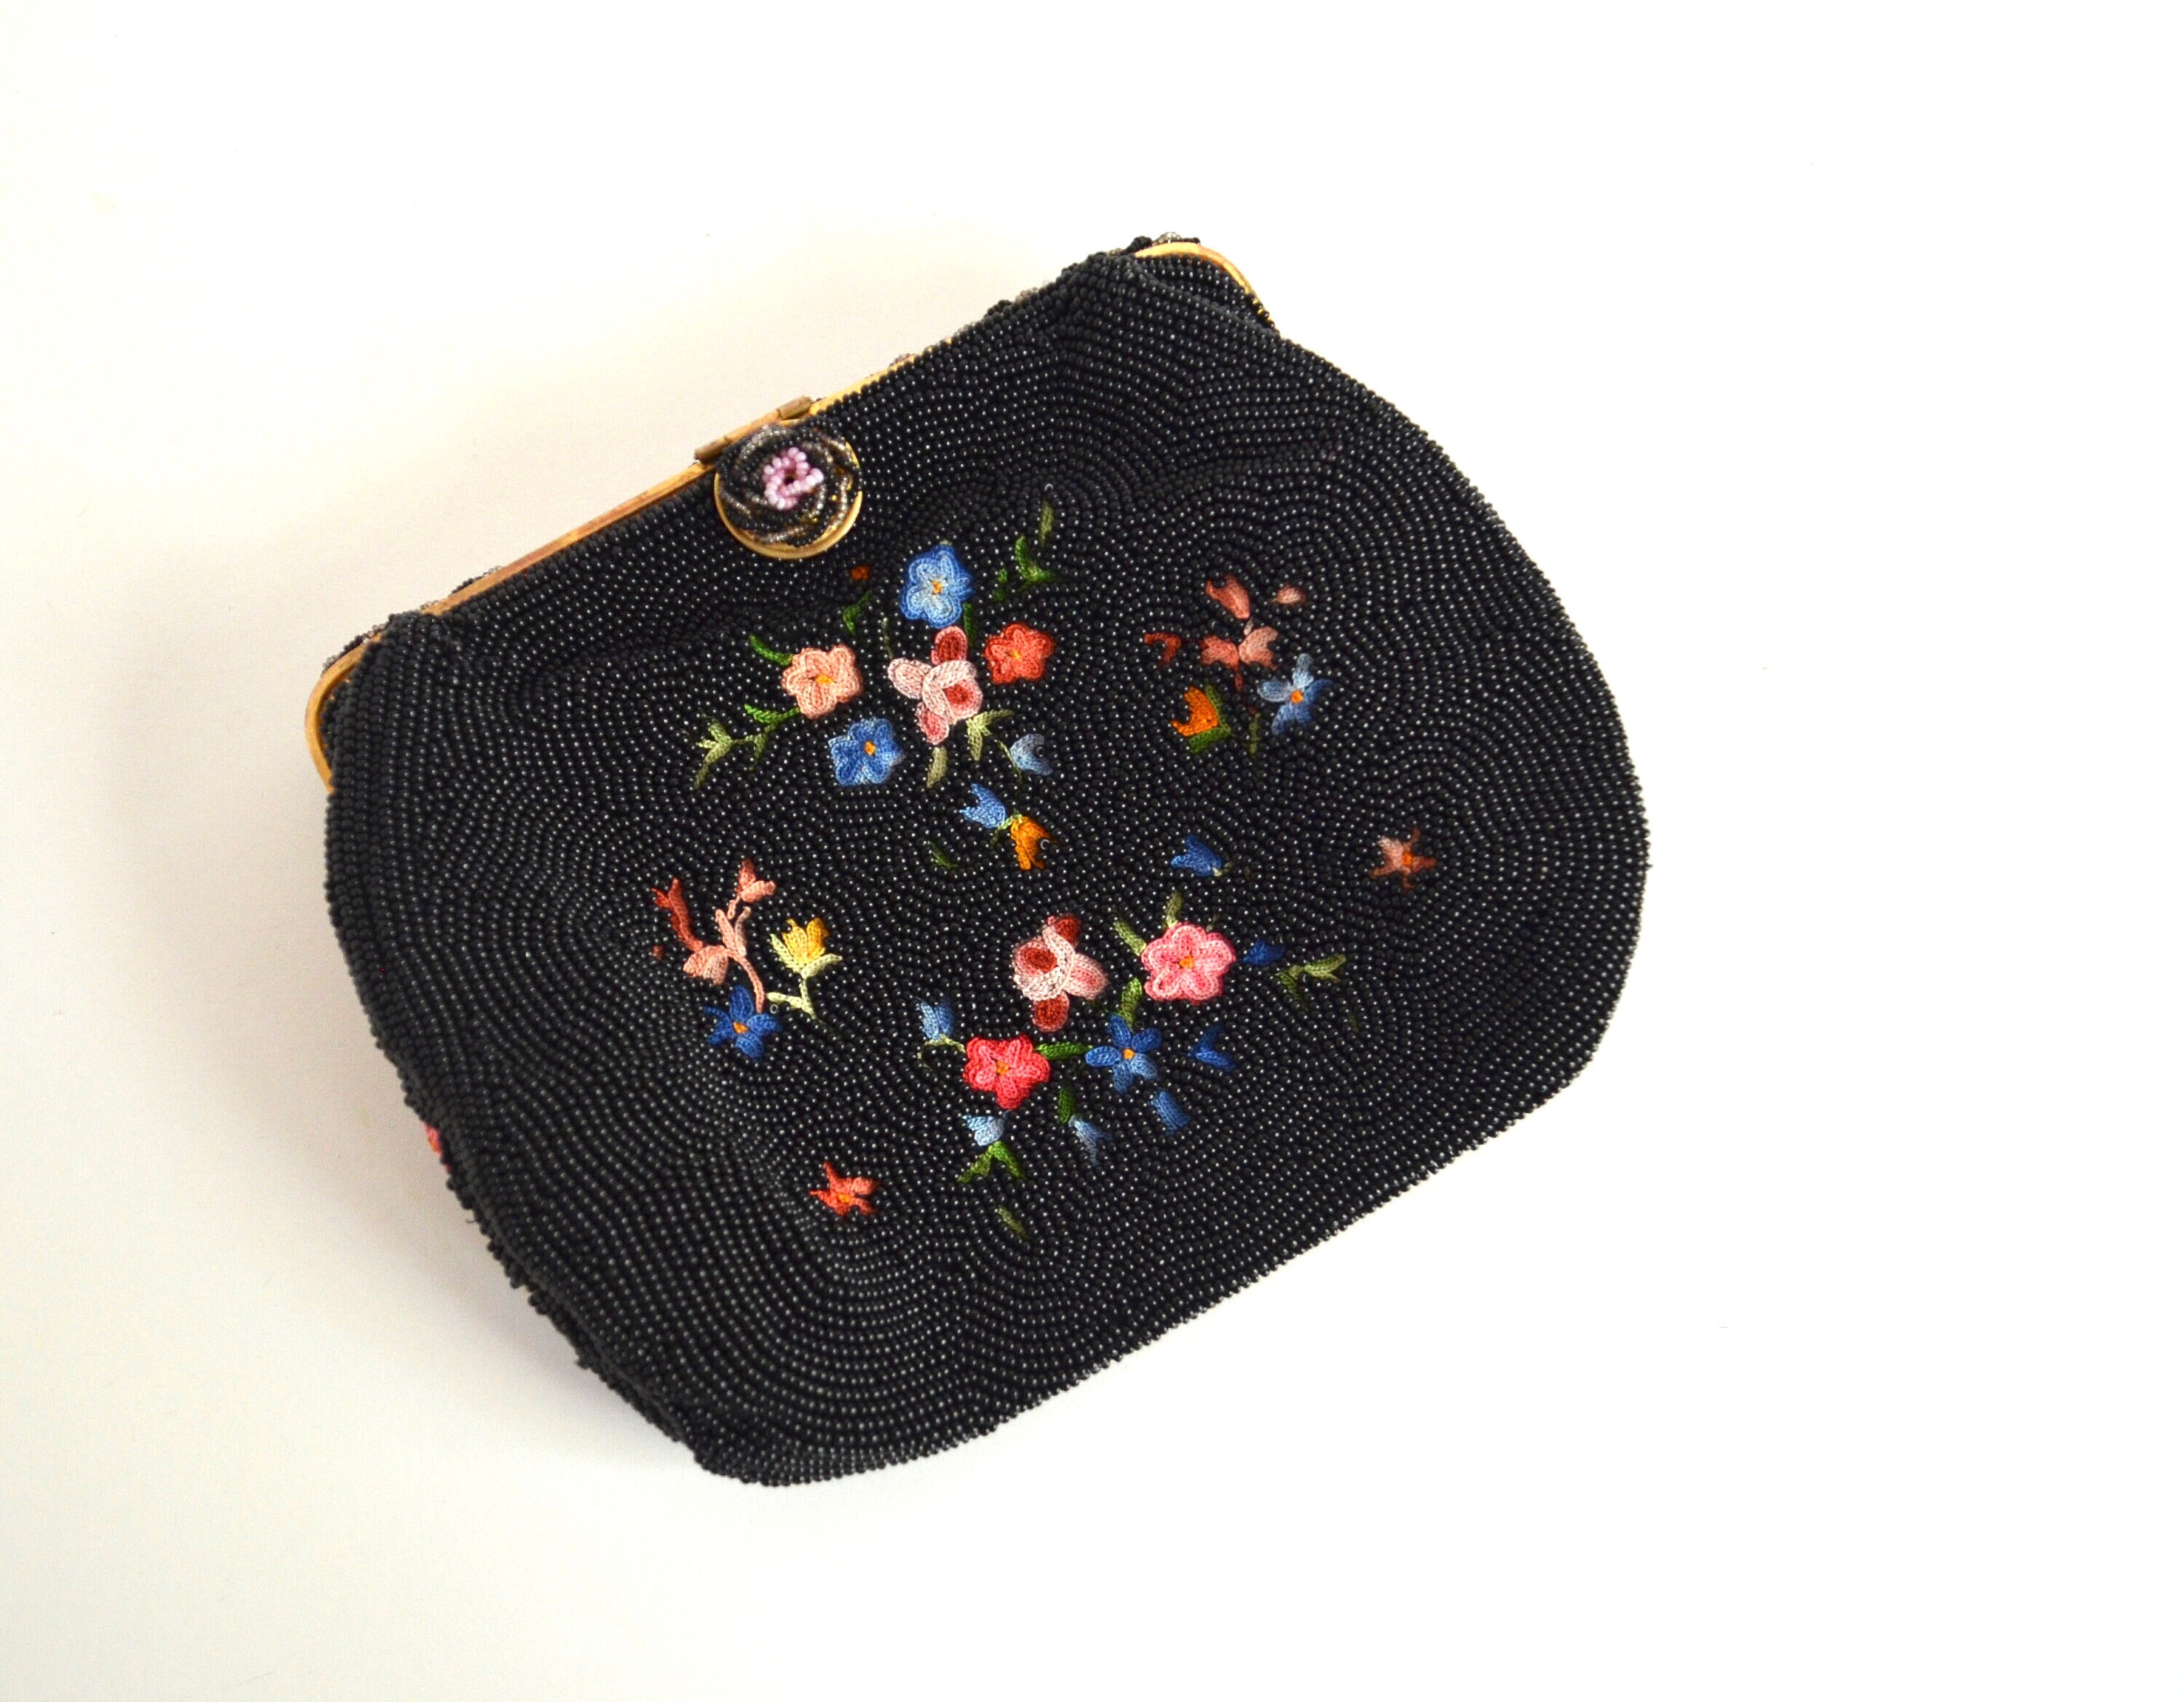 Vintage Beaded Embroidered Tambour Purse Embroidery Hand Bag Made In Italy